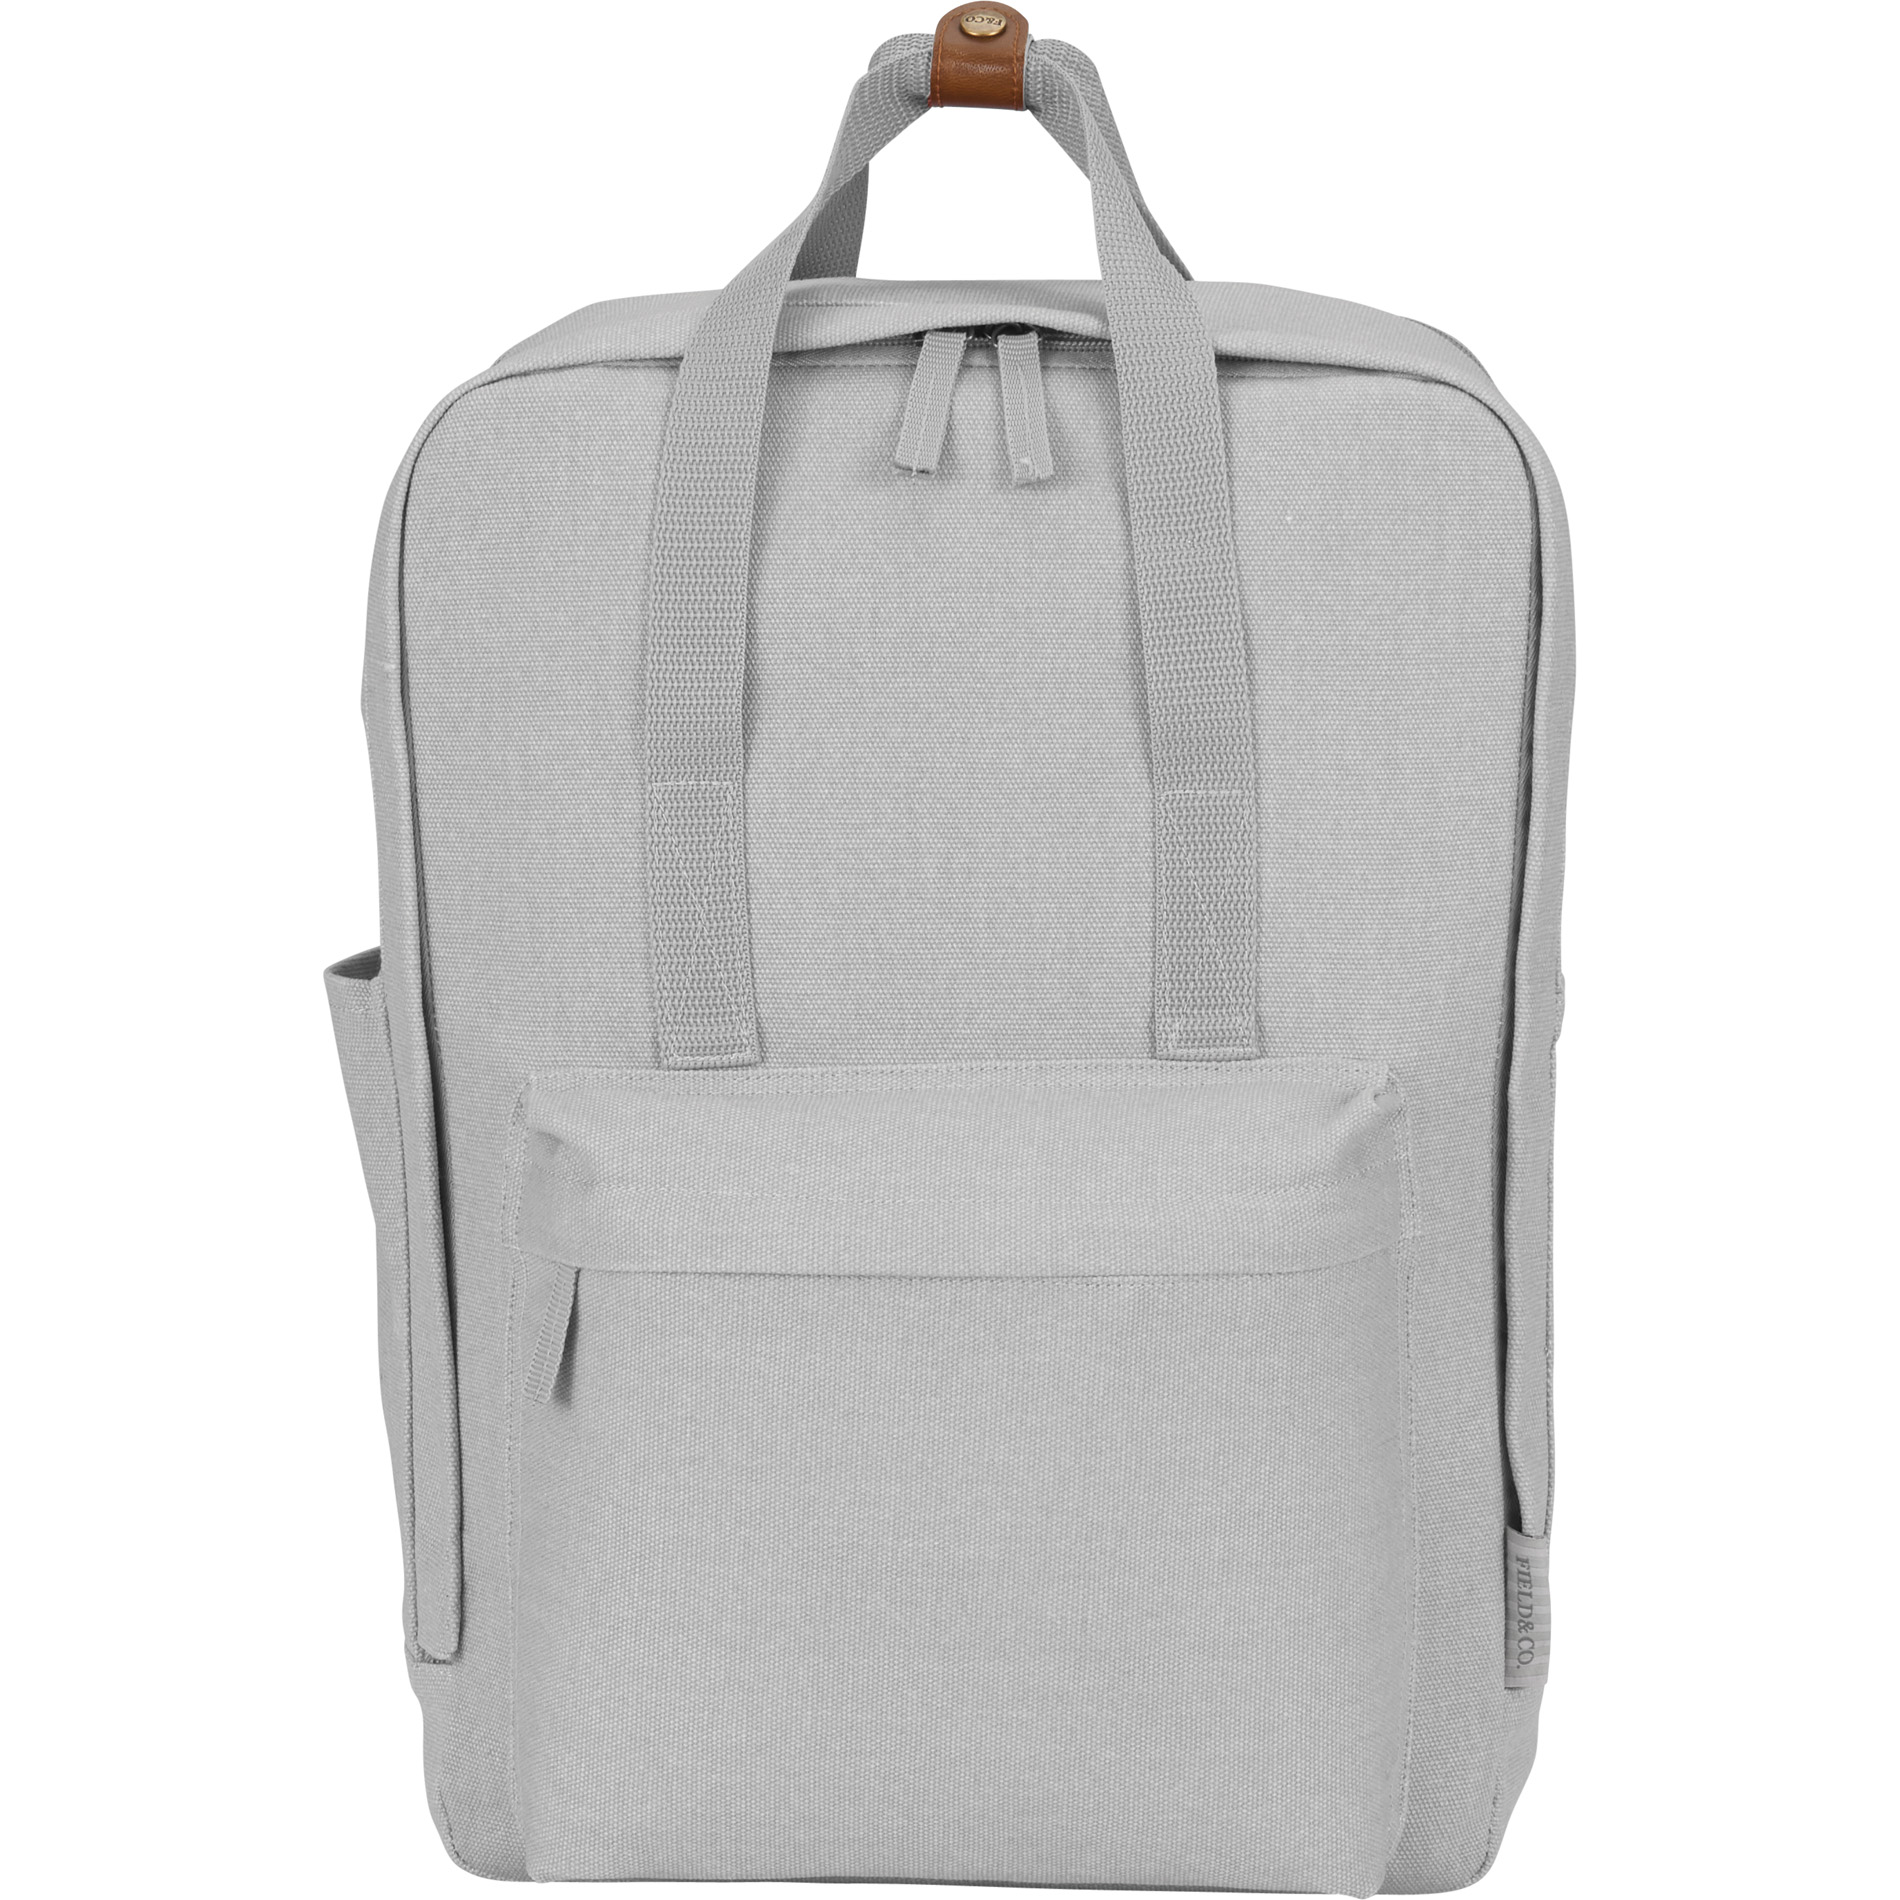 Field & Co 7950-28 - Book 15" Computer Backpack